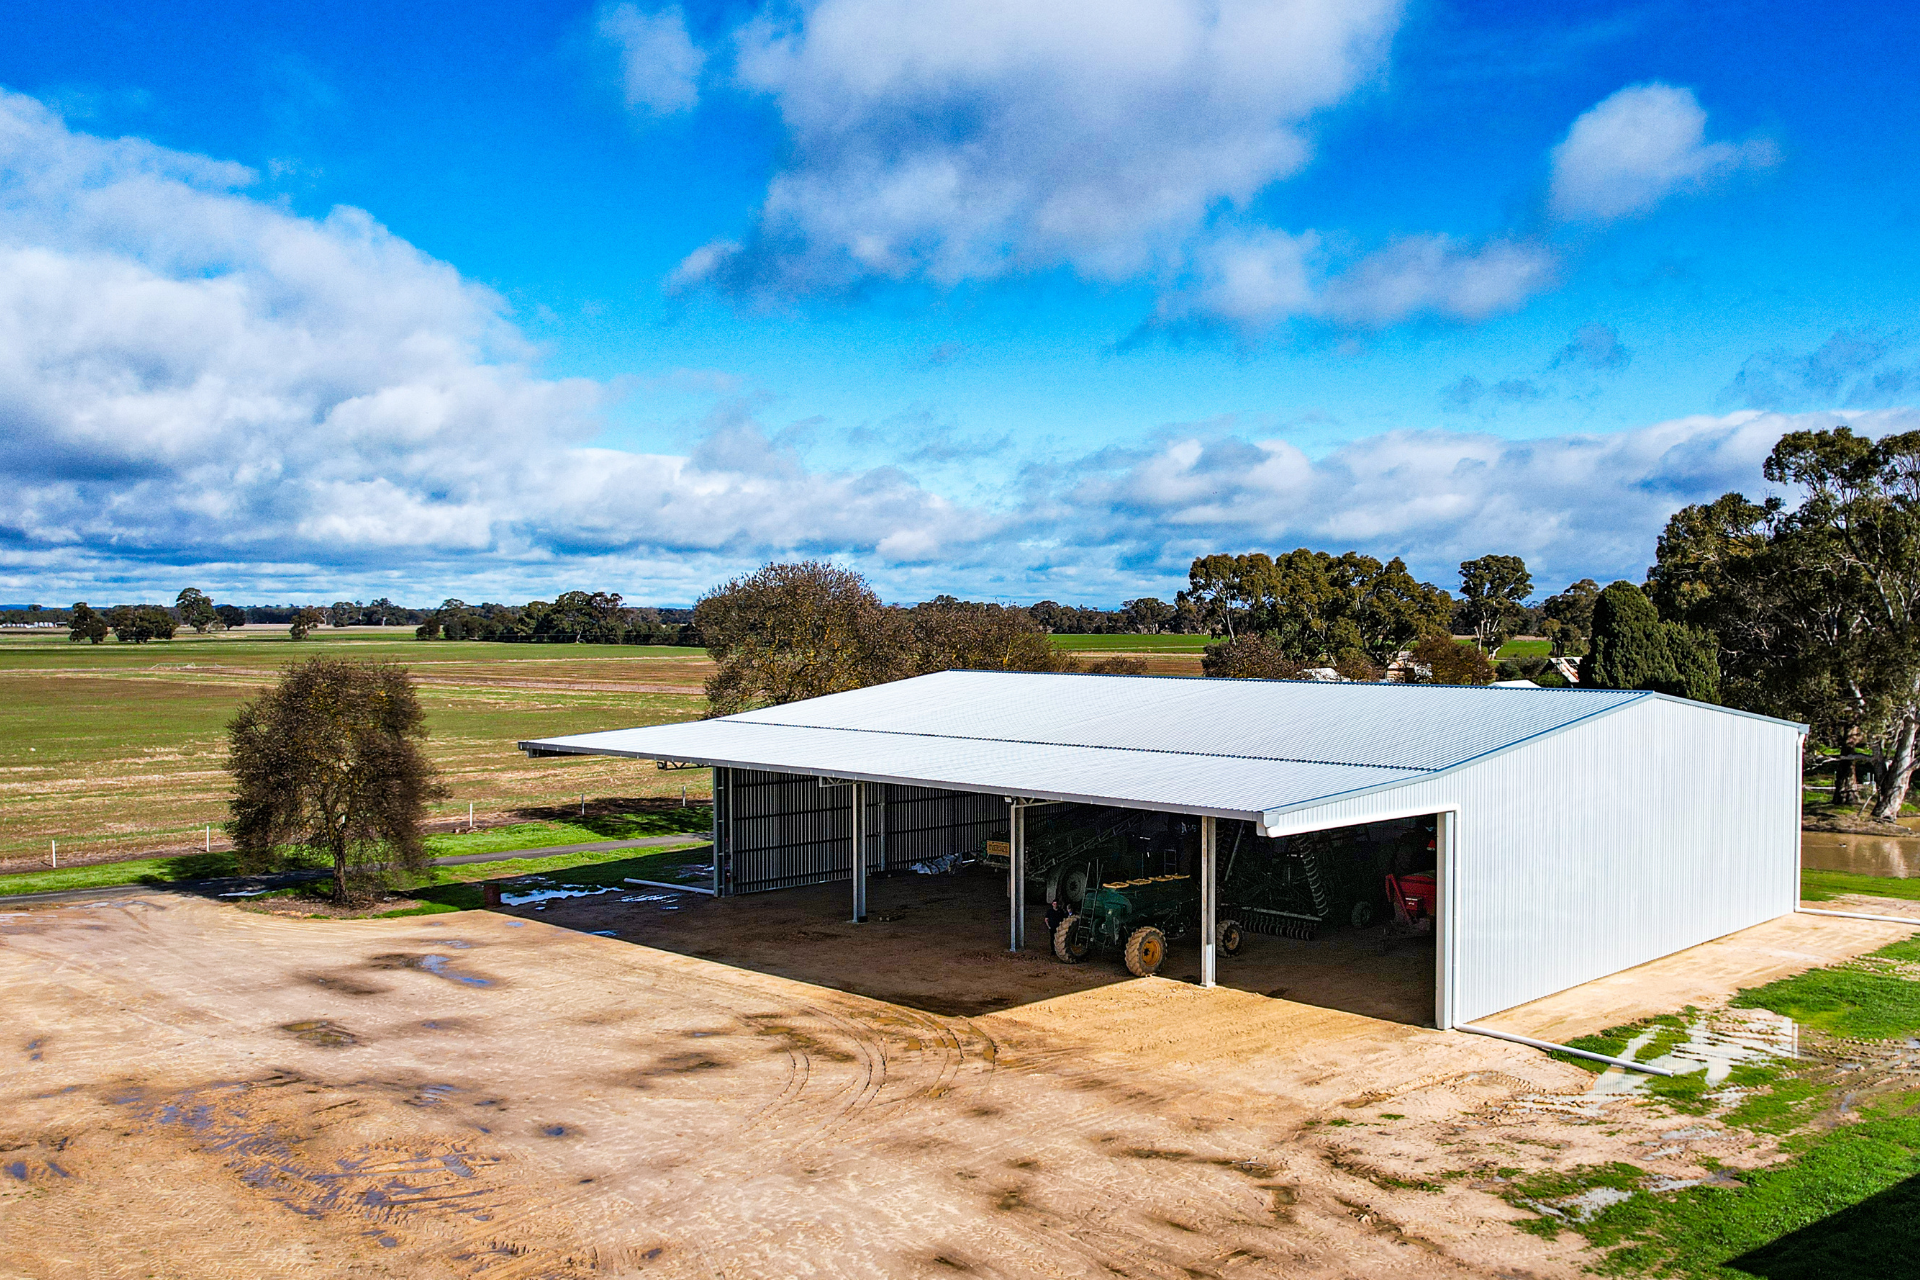 A 32m x 24m x 6.75m machinery shed with 8 metre canopy at Navarre VIC